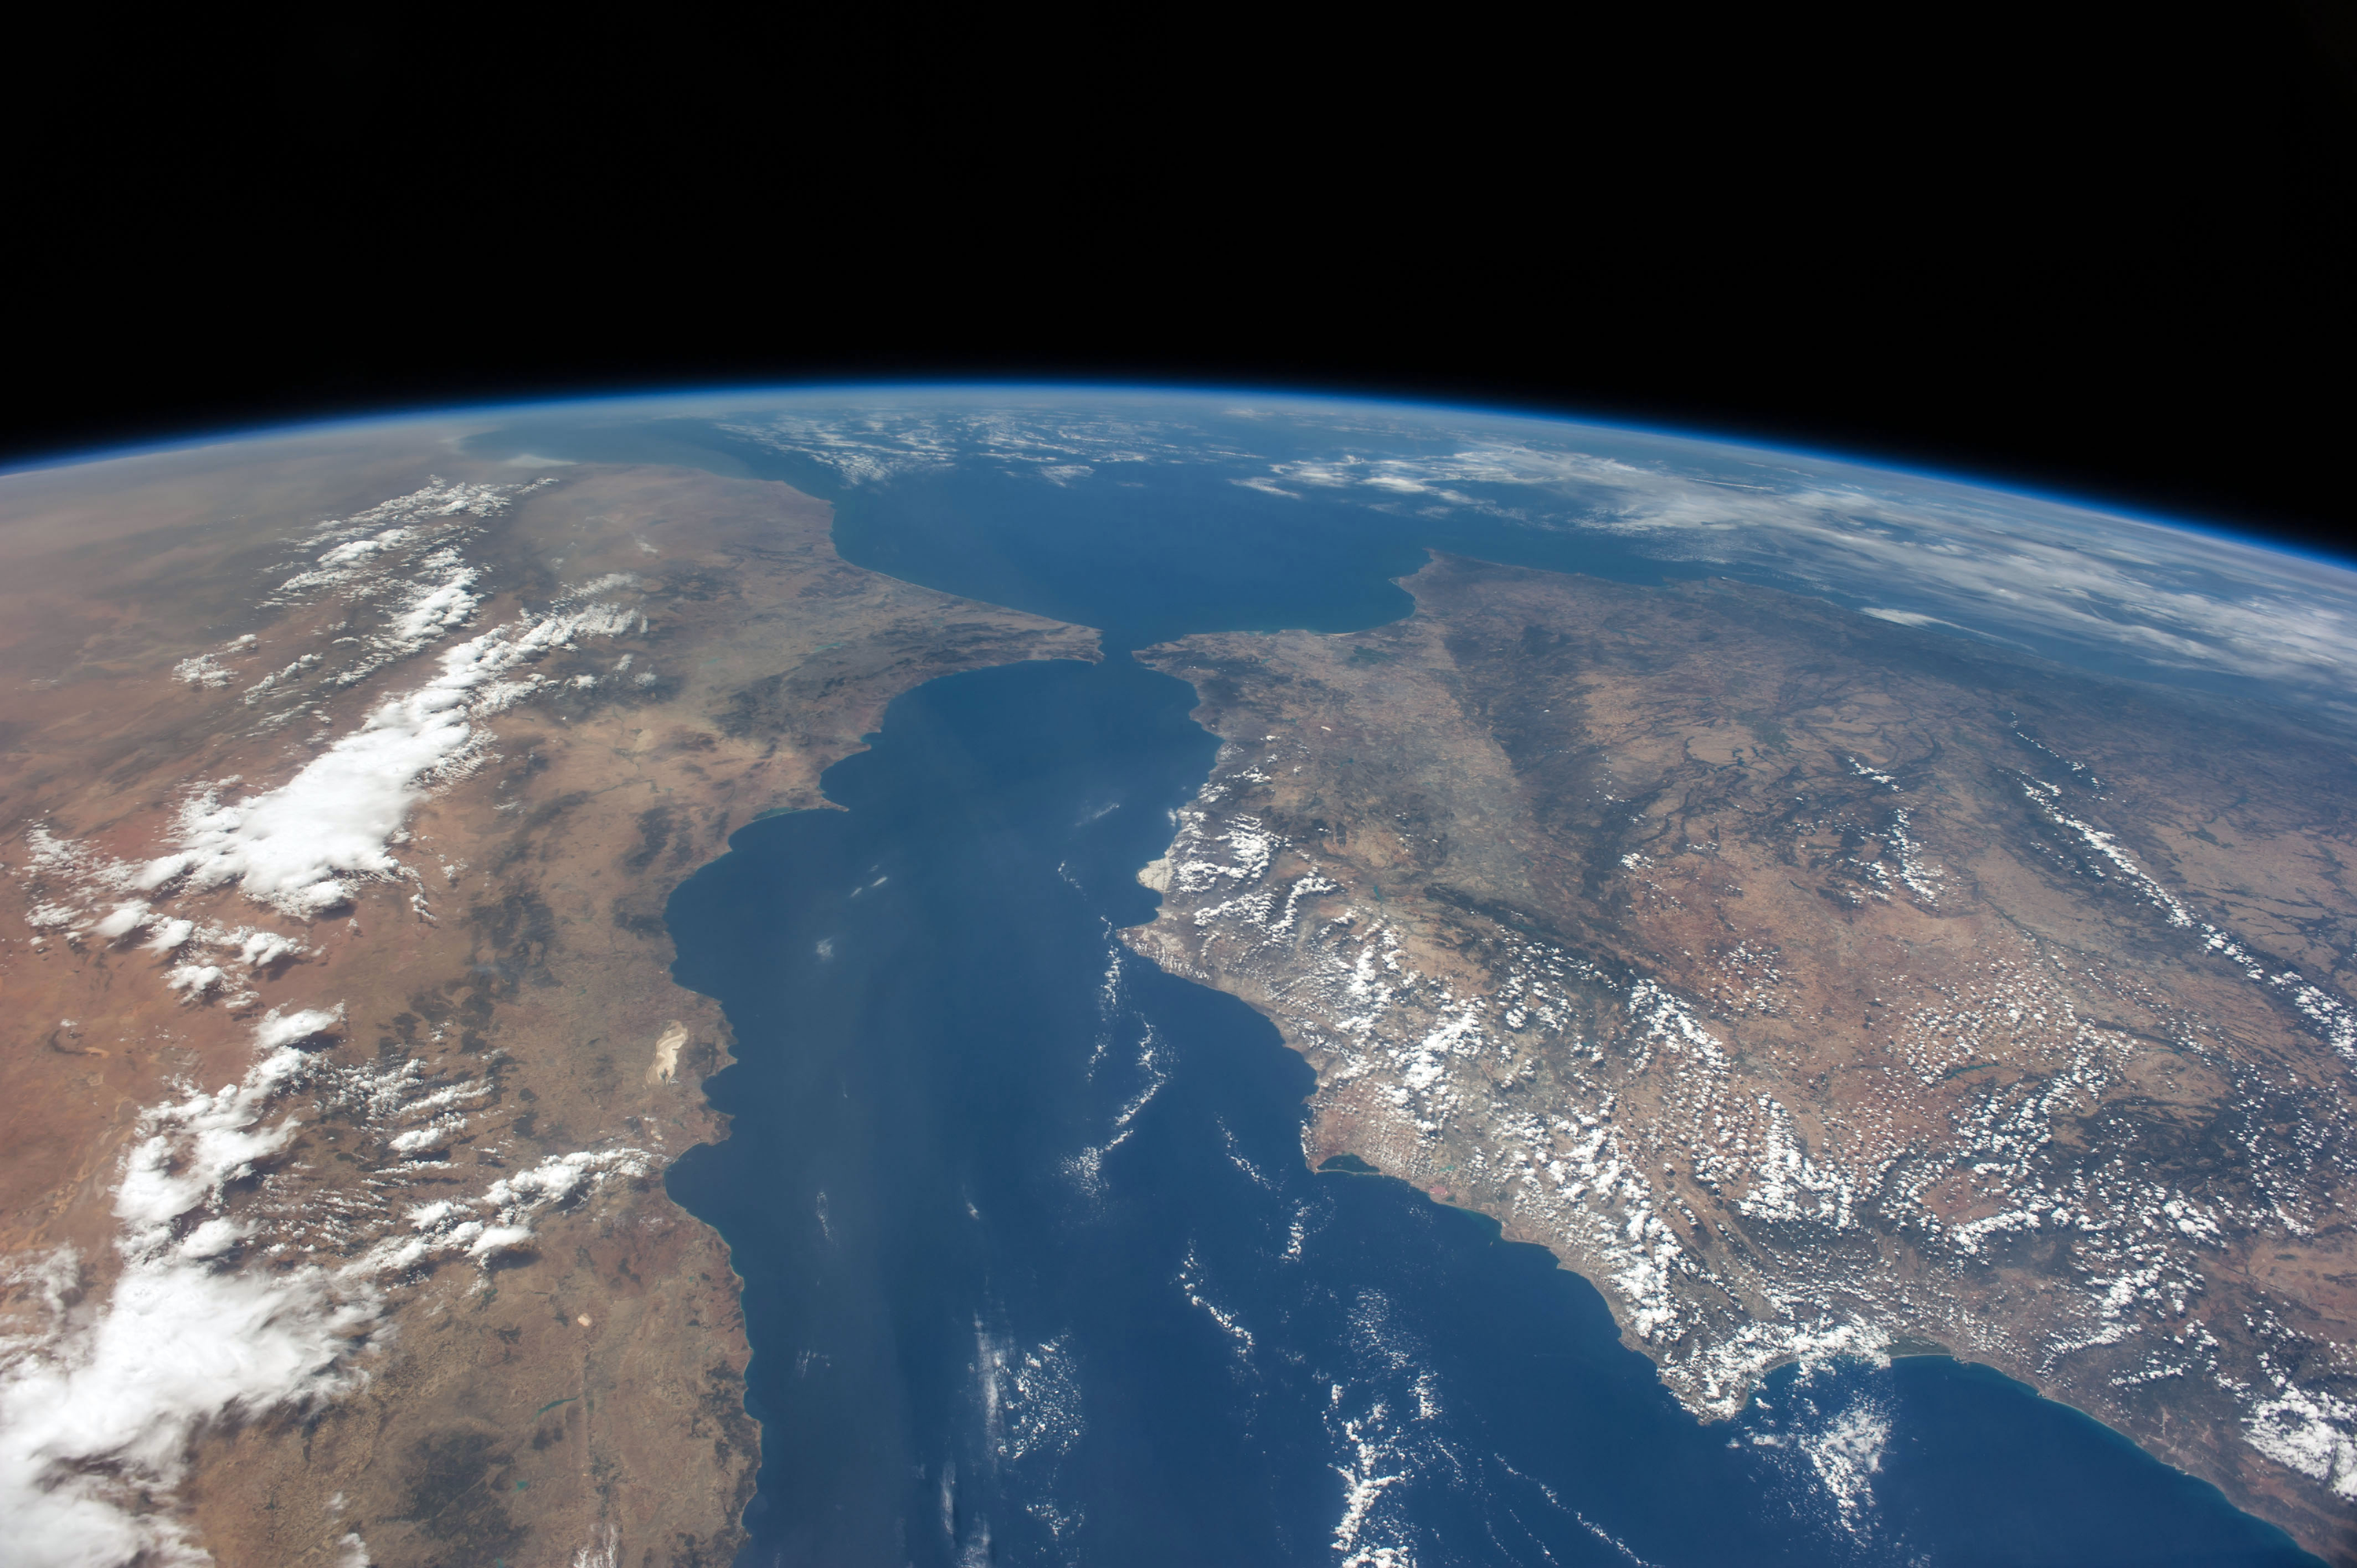 The three nations from the space